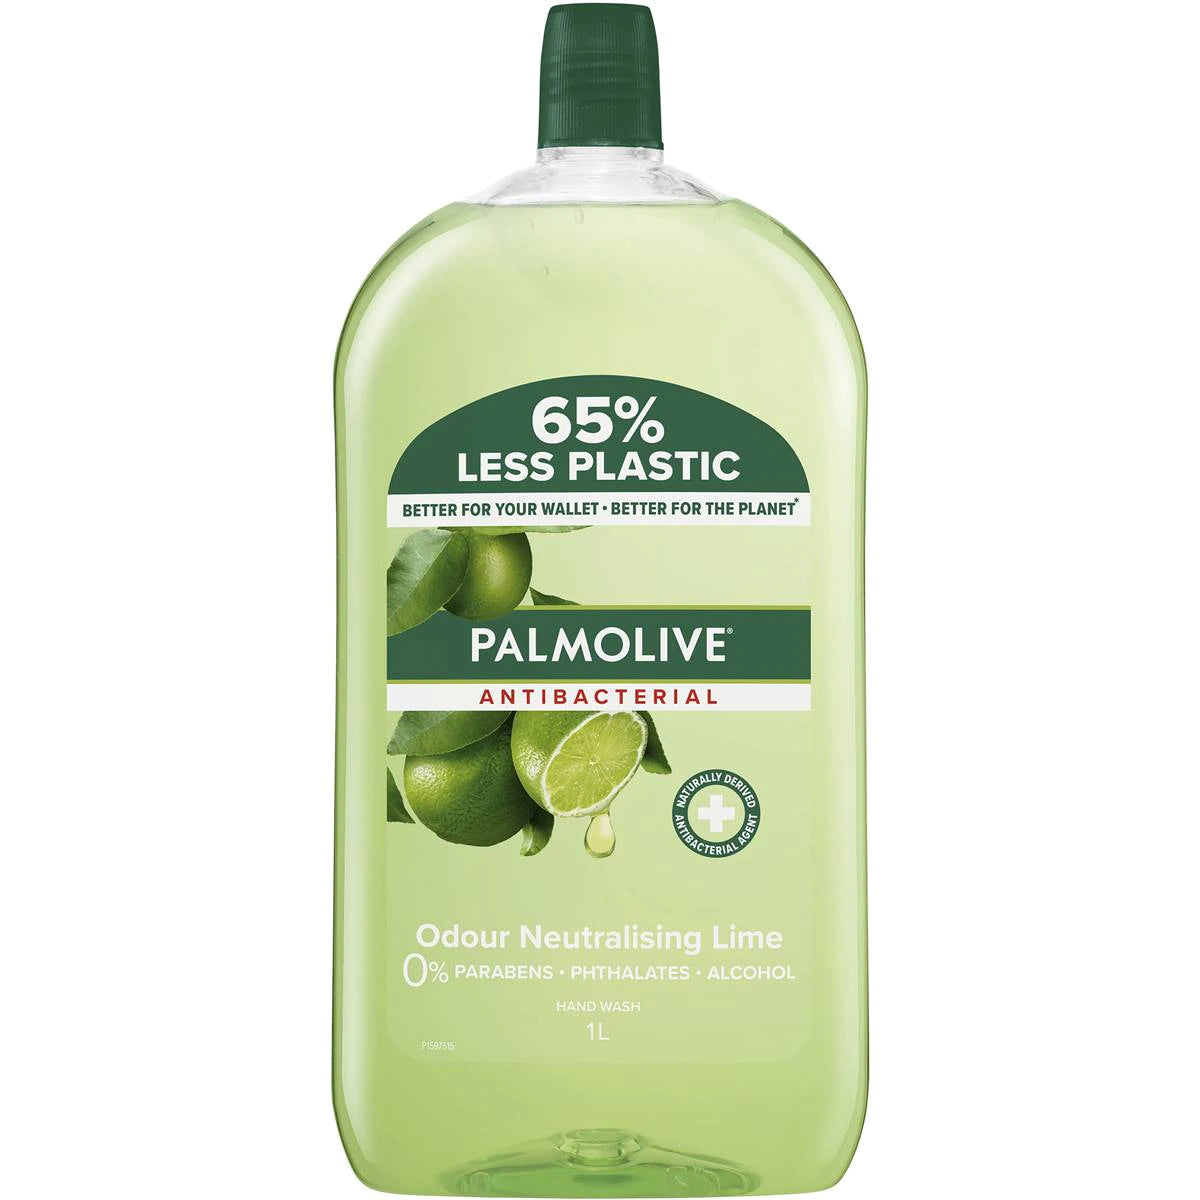 Palmolive Antibacterial Hand Soap Refill Lime 1L